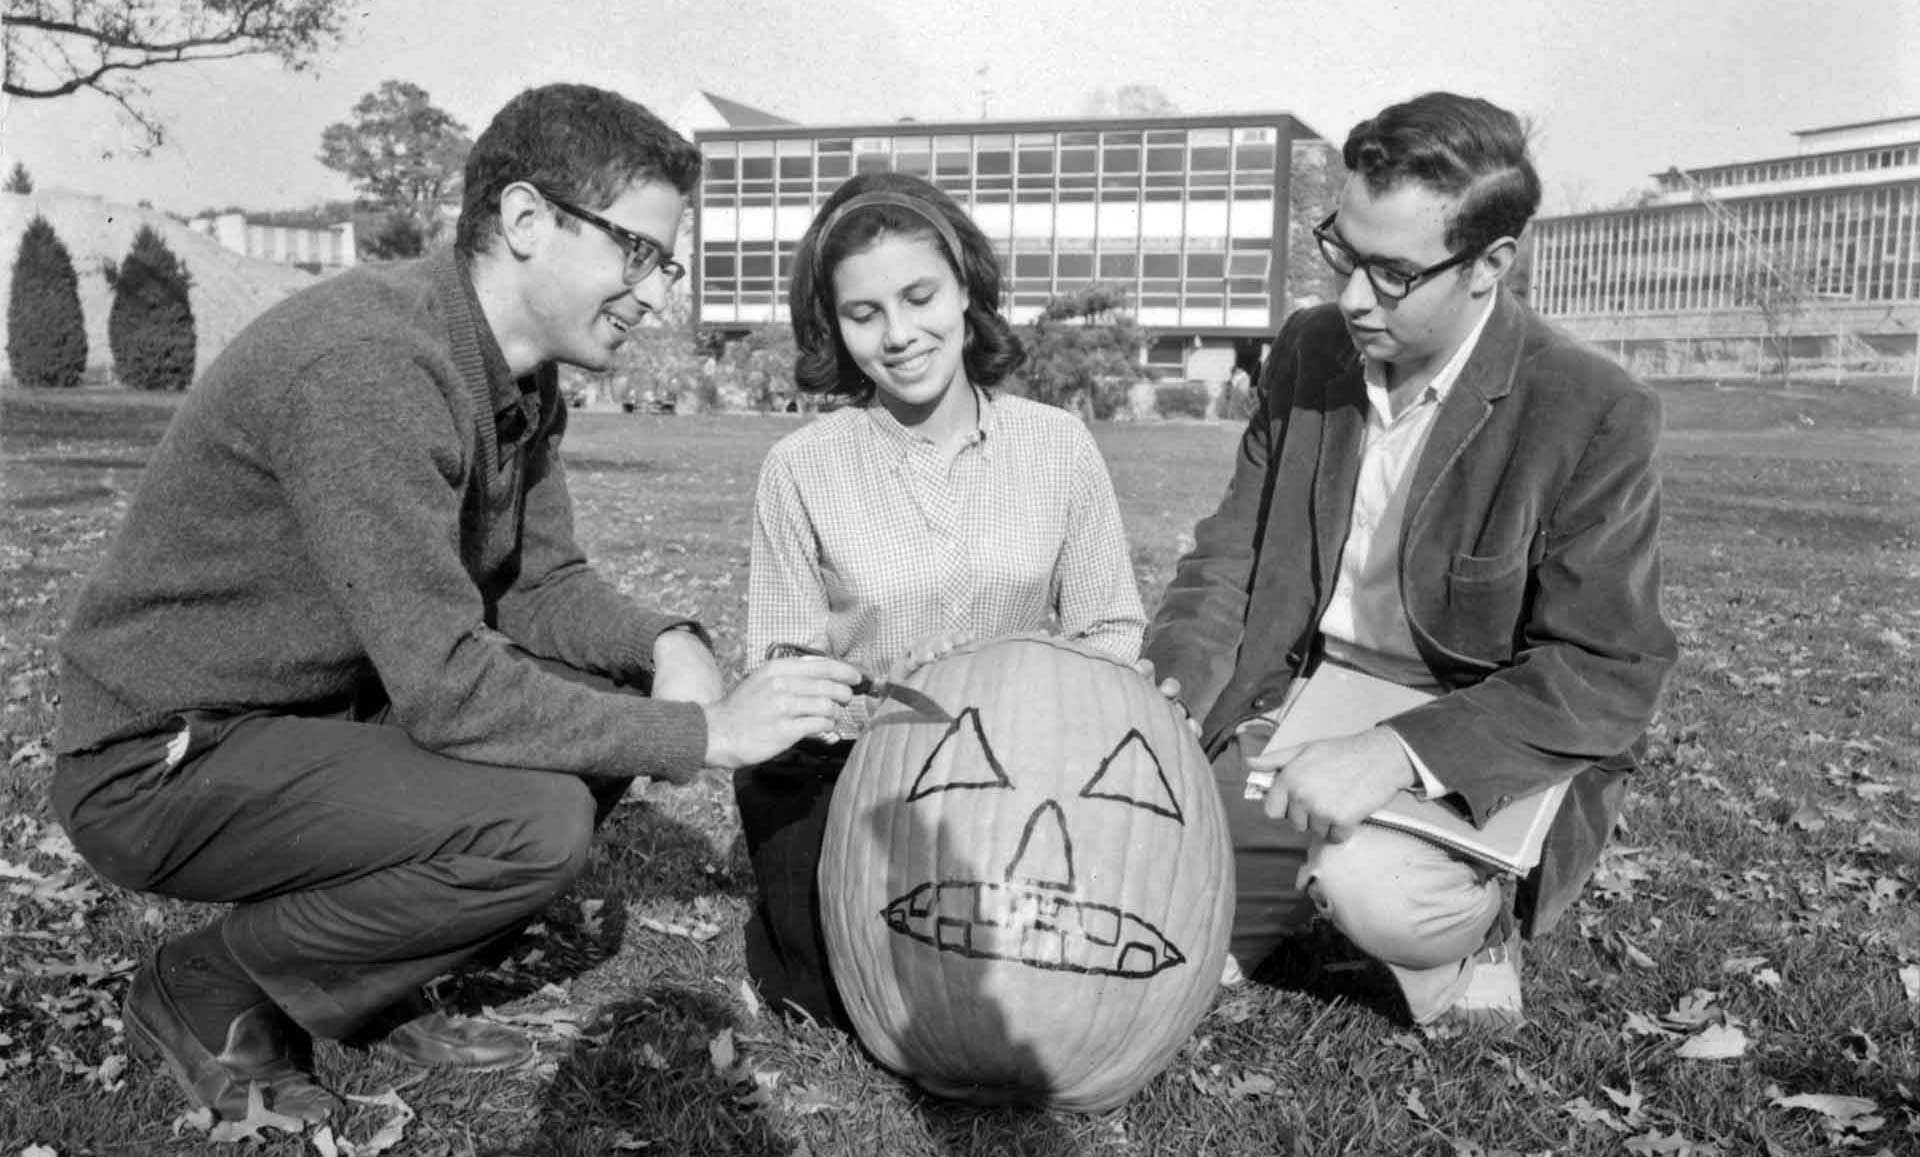 Students sit around a carved pumpkin sitting on the grass